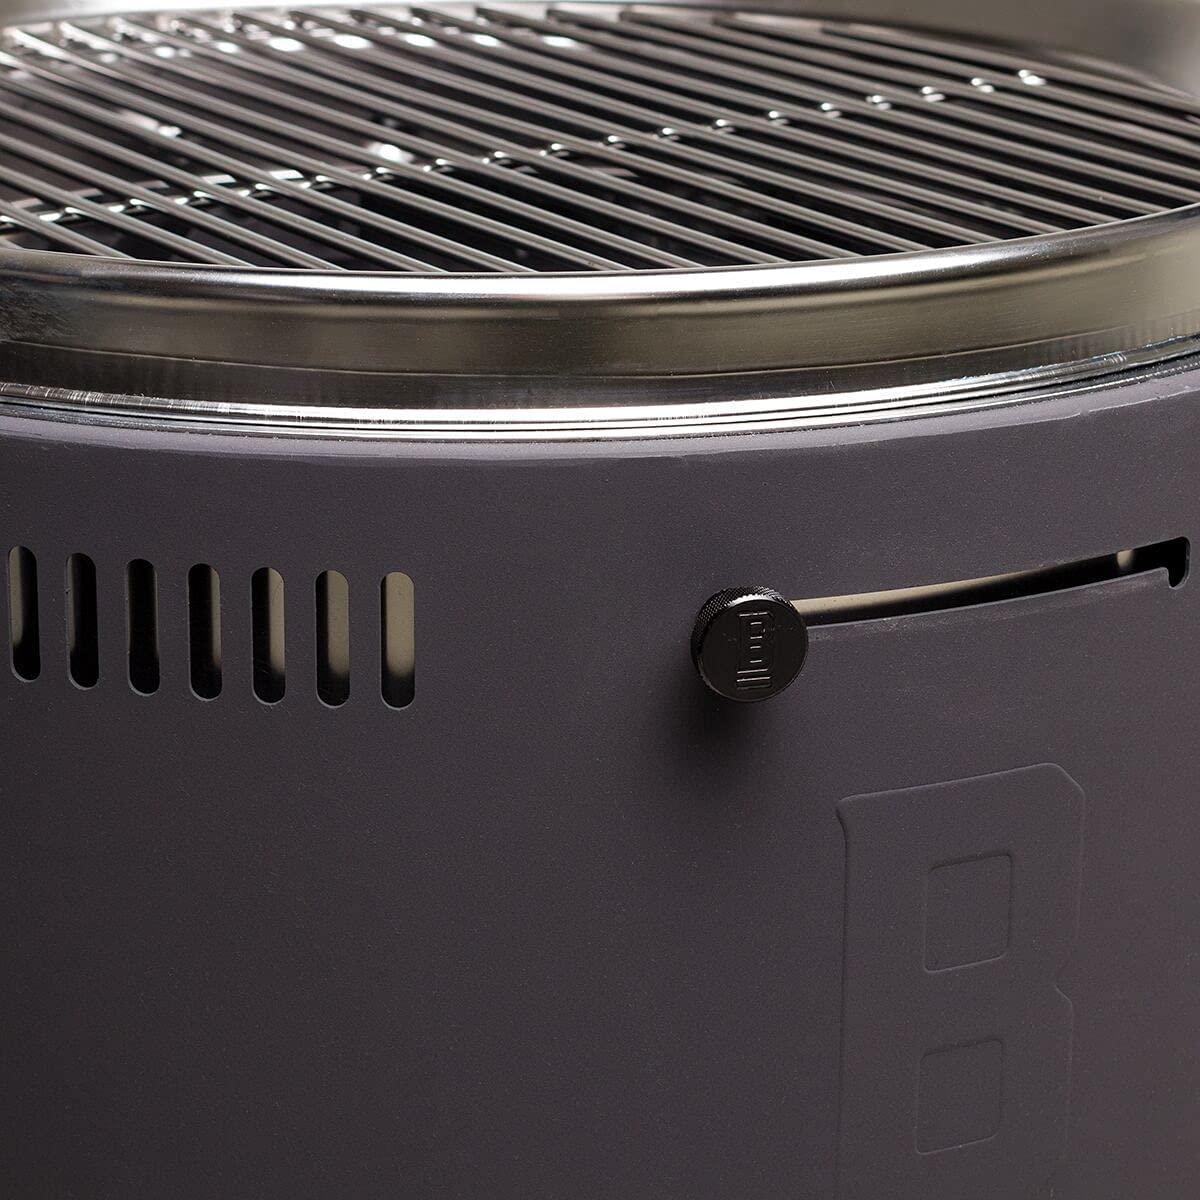 Burch Barrel 56232 Charcoal/Wood Pellet Grill and Smoker